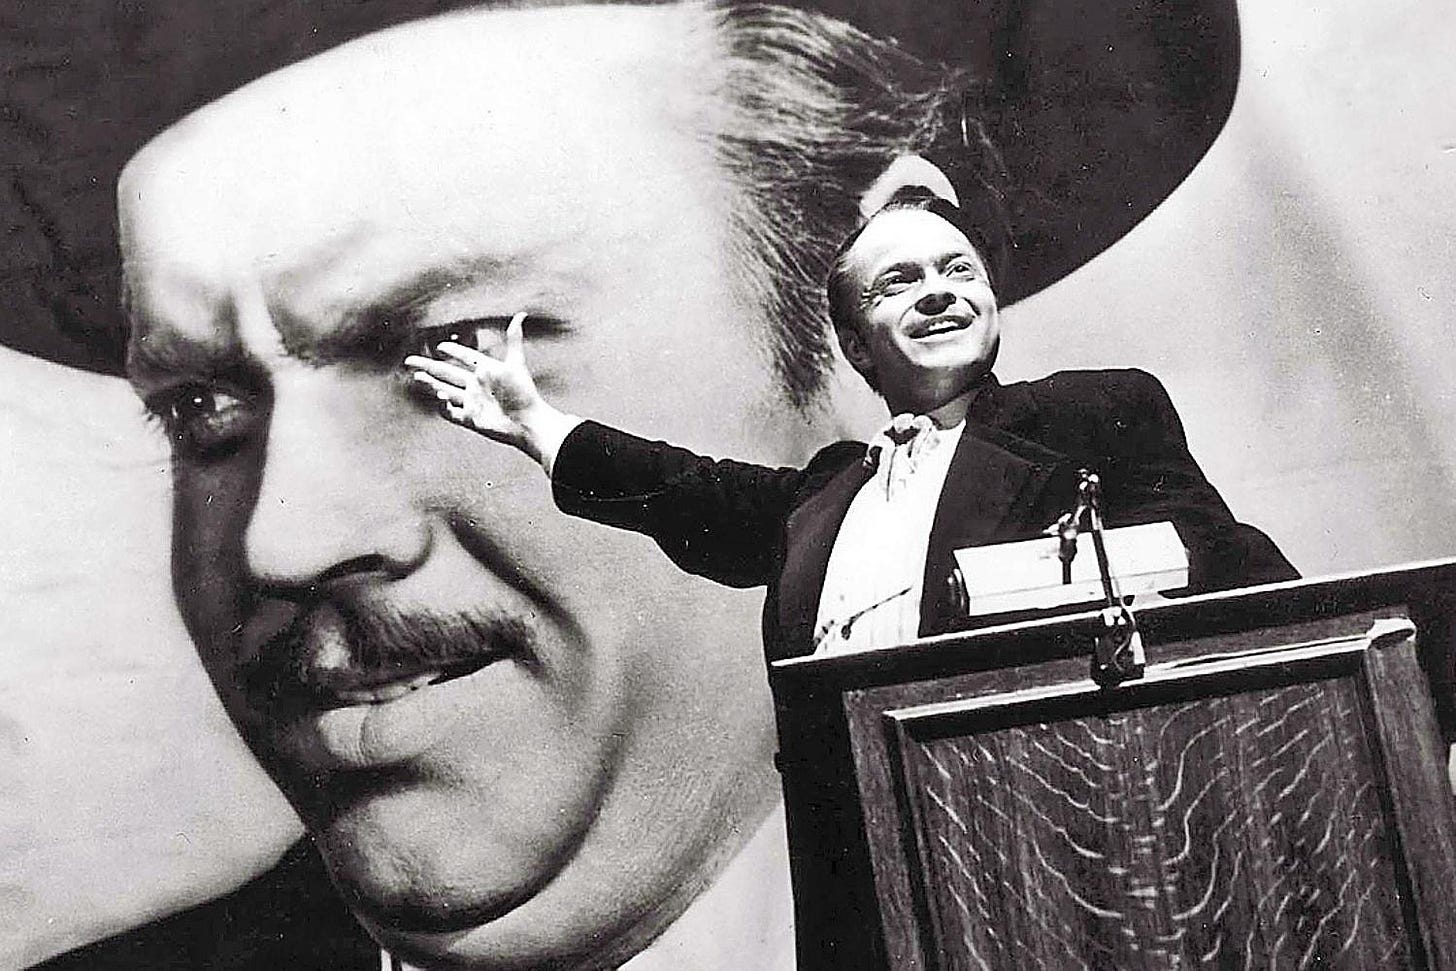 Classic film: Citizen Kane (1941) | Times2 | The Times